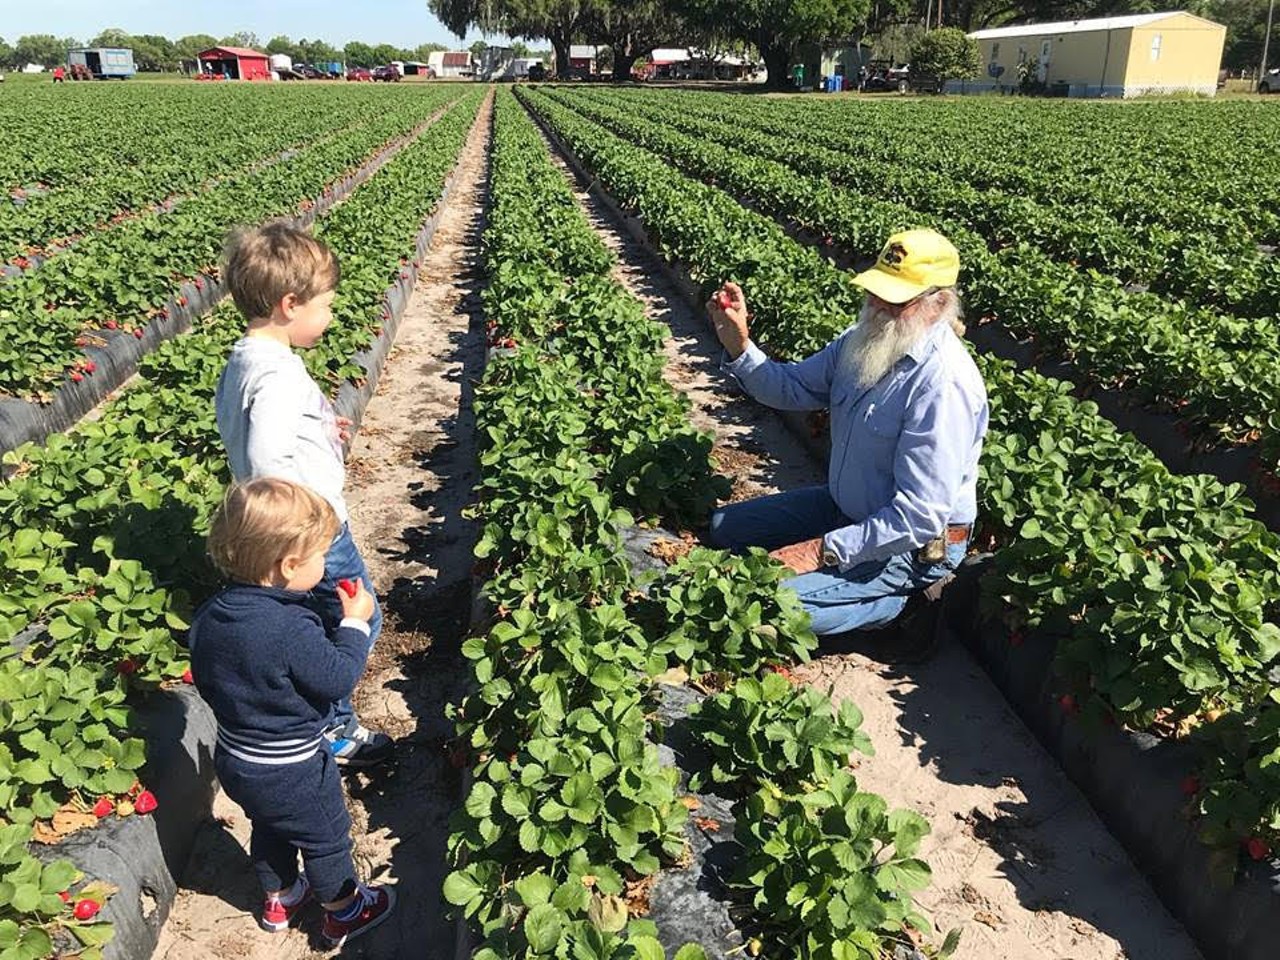 
Wish Farms
100 Stearns St., Plant City, 813-752-5111
If you want your strawberry picking to have a cause, look no further than Wish Farms. Proceeds gained from the general public are donated to sponsored charities involved in youth development, education and child care.
Photo via Wish Farms/Facebook